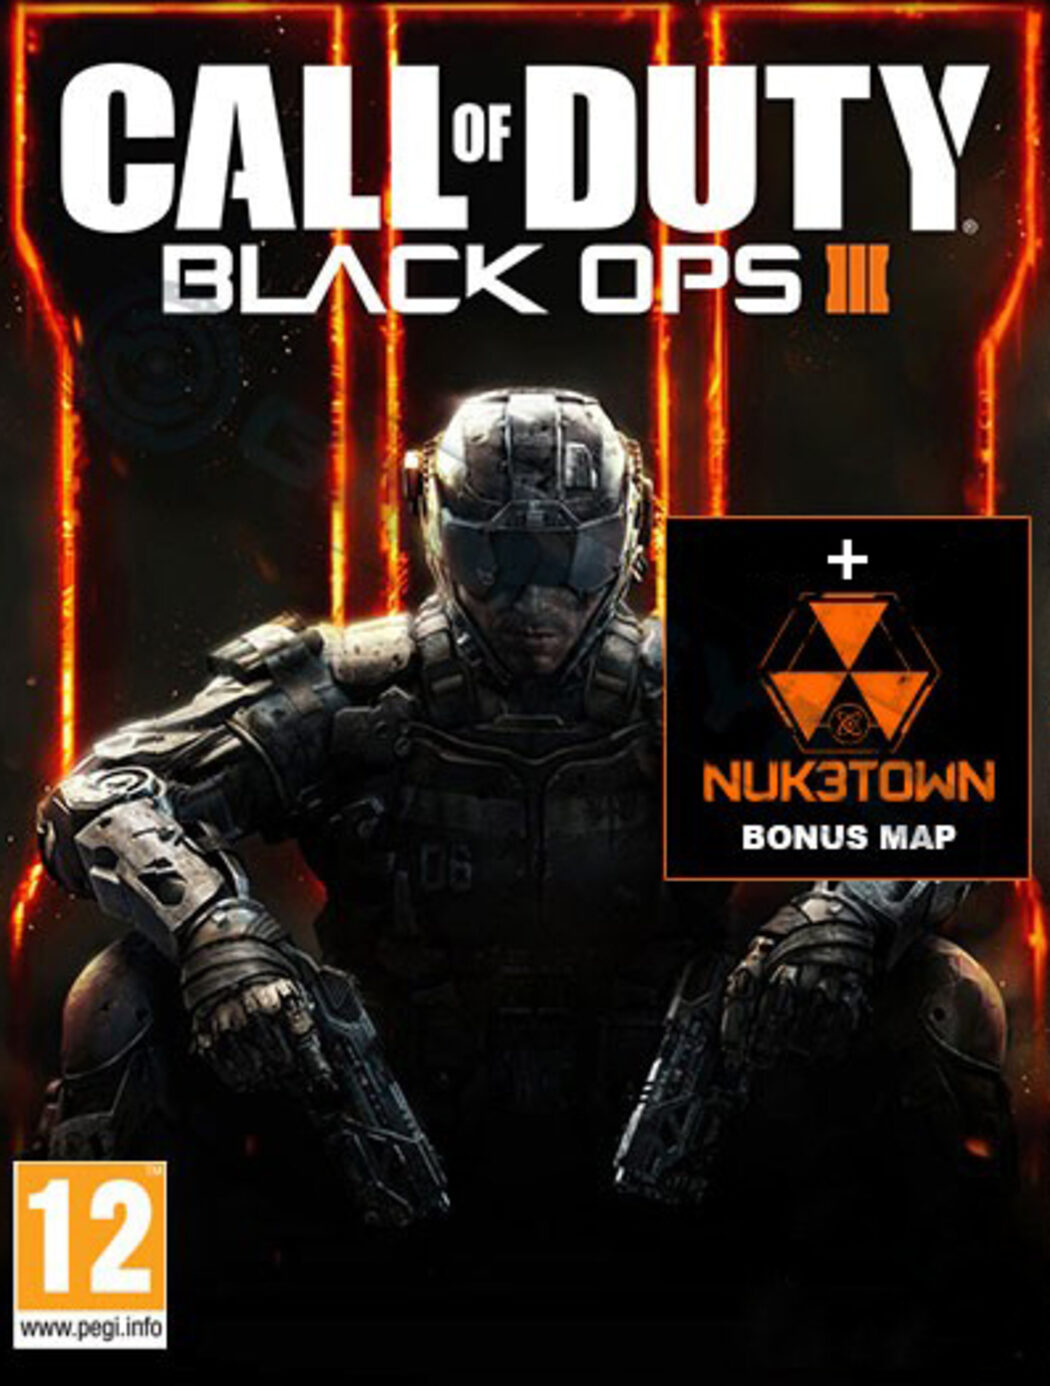 Call of Duty Black ops 3.